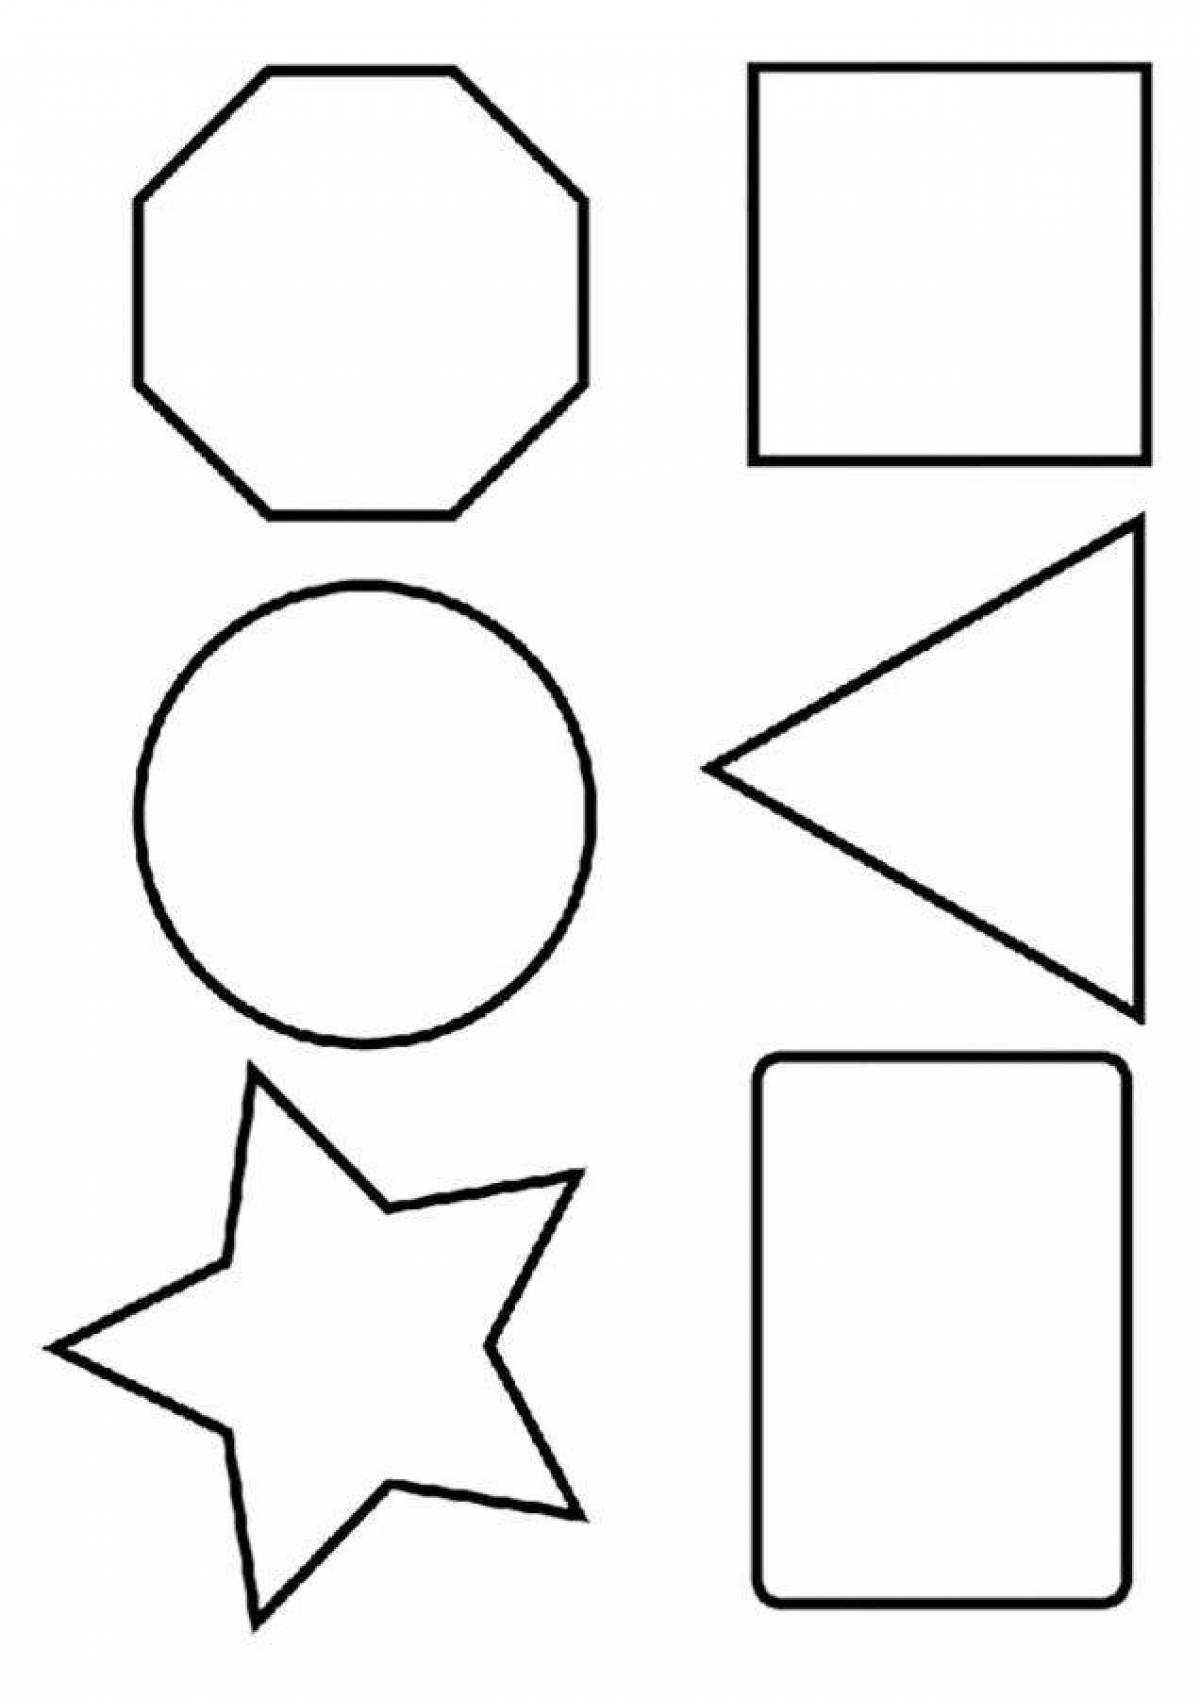 Coloring page of funny geometric shapes